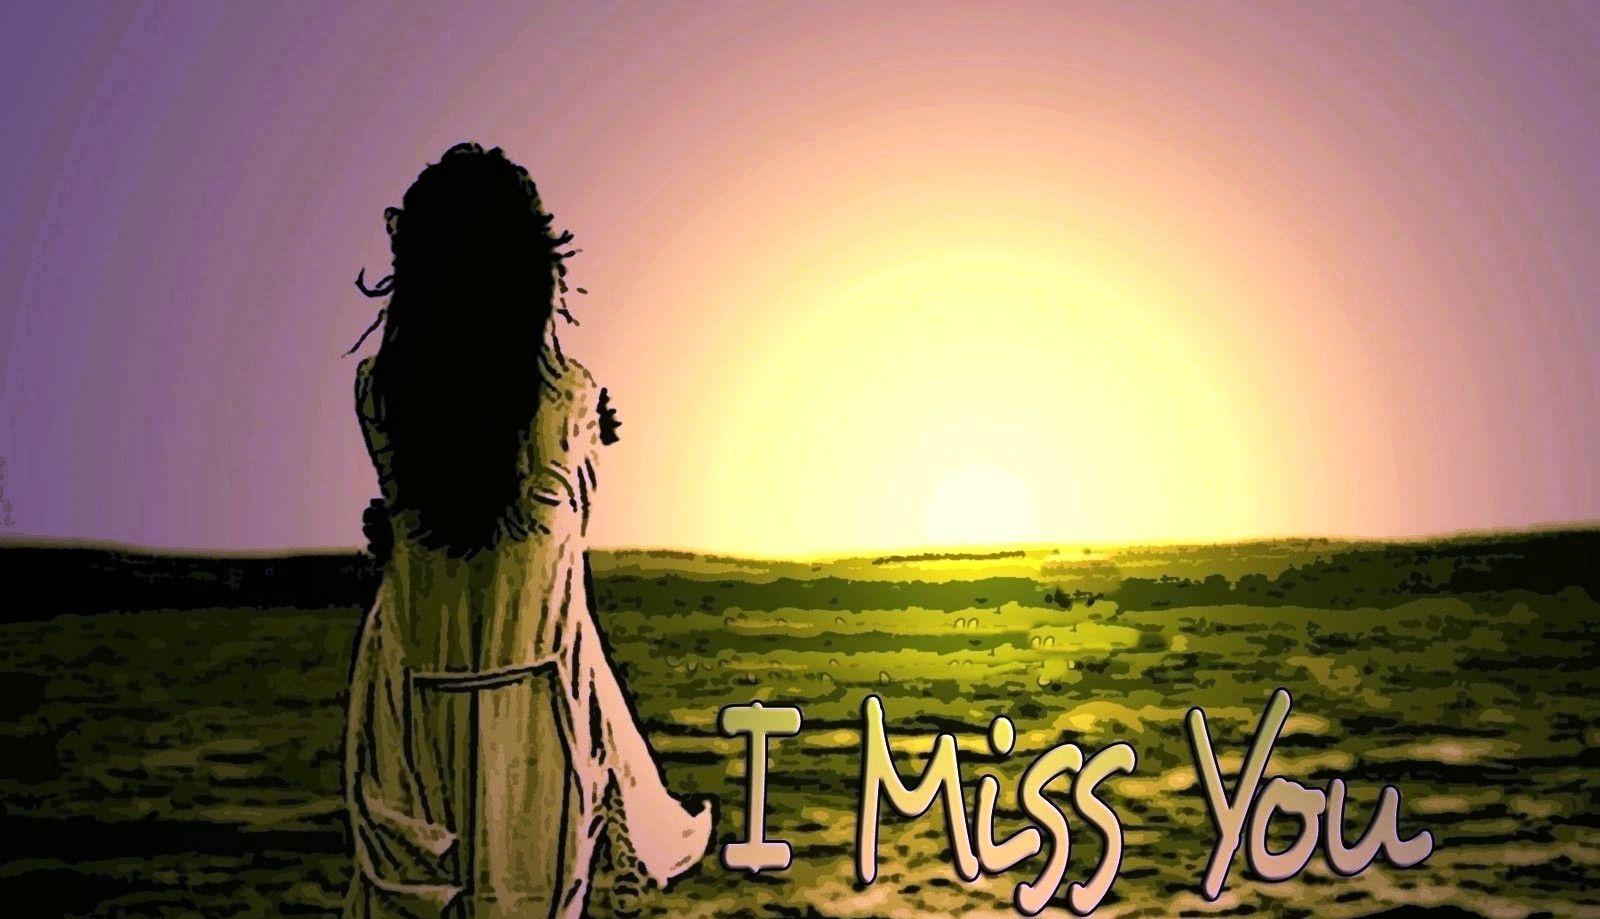 I miss you wallpaper free download